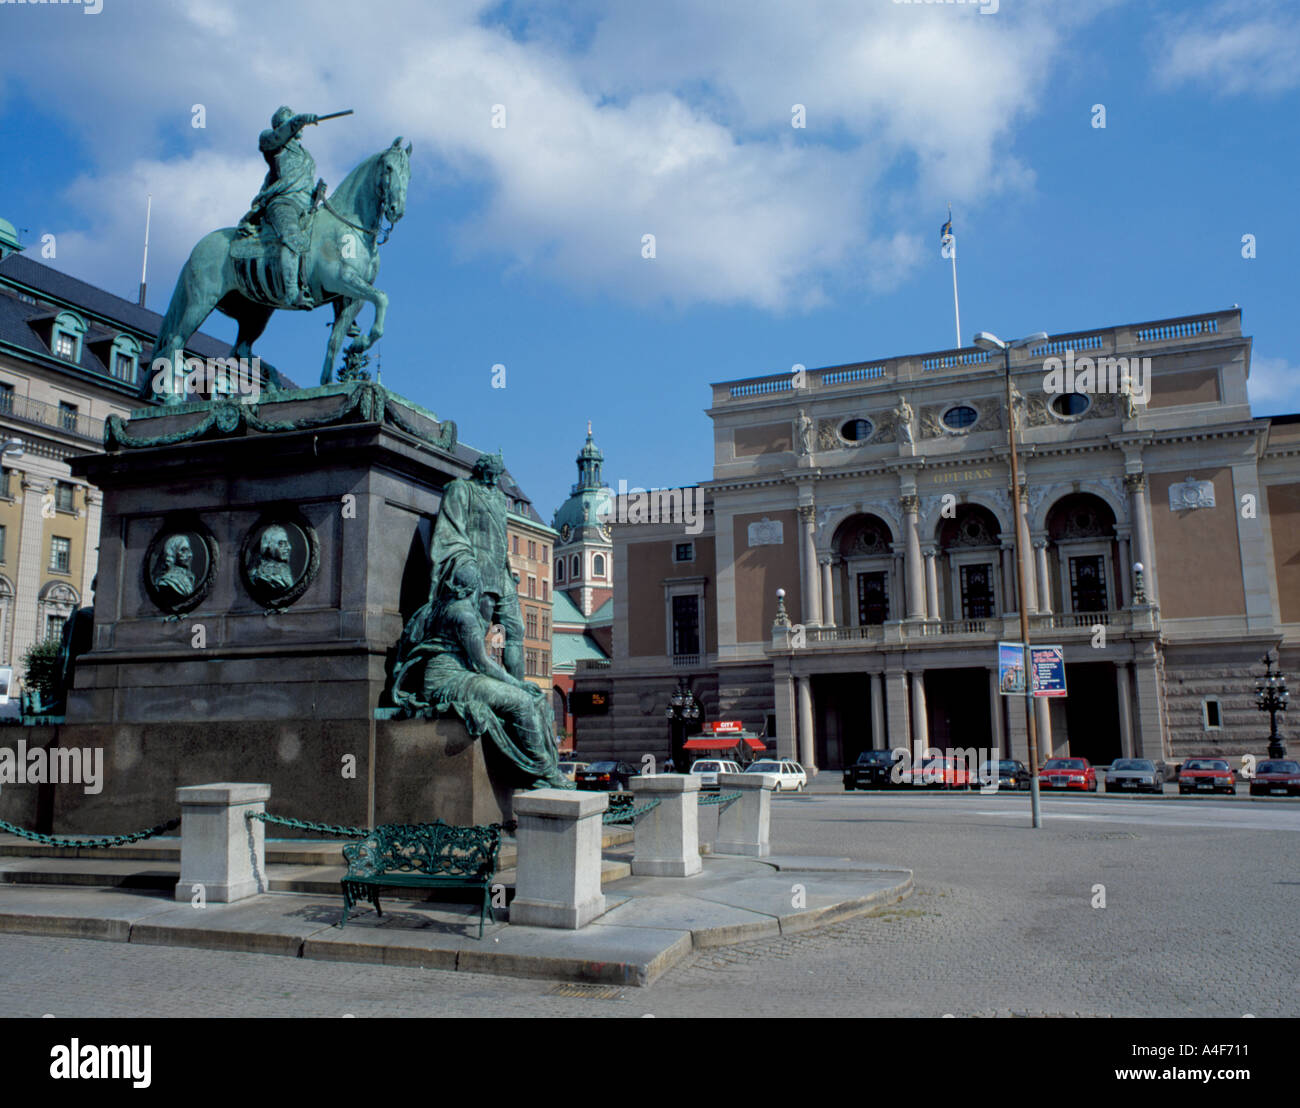 Equestrian statue of Gustavus Adolphus, Gustav Adolfs Torg with the Opera House beyond, Norrmalm, Stockholm, Sweden. Stock Photo